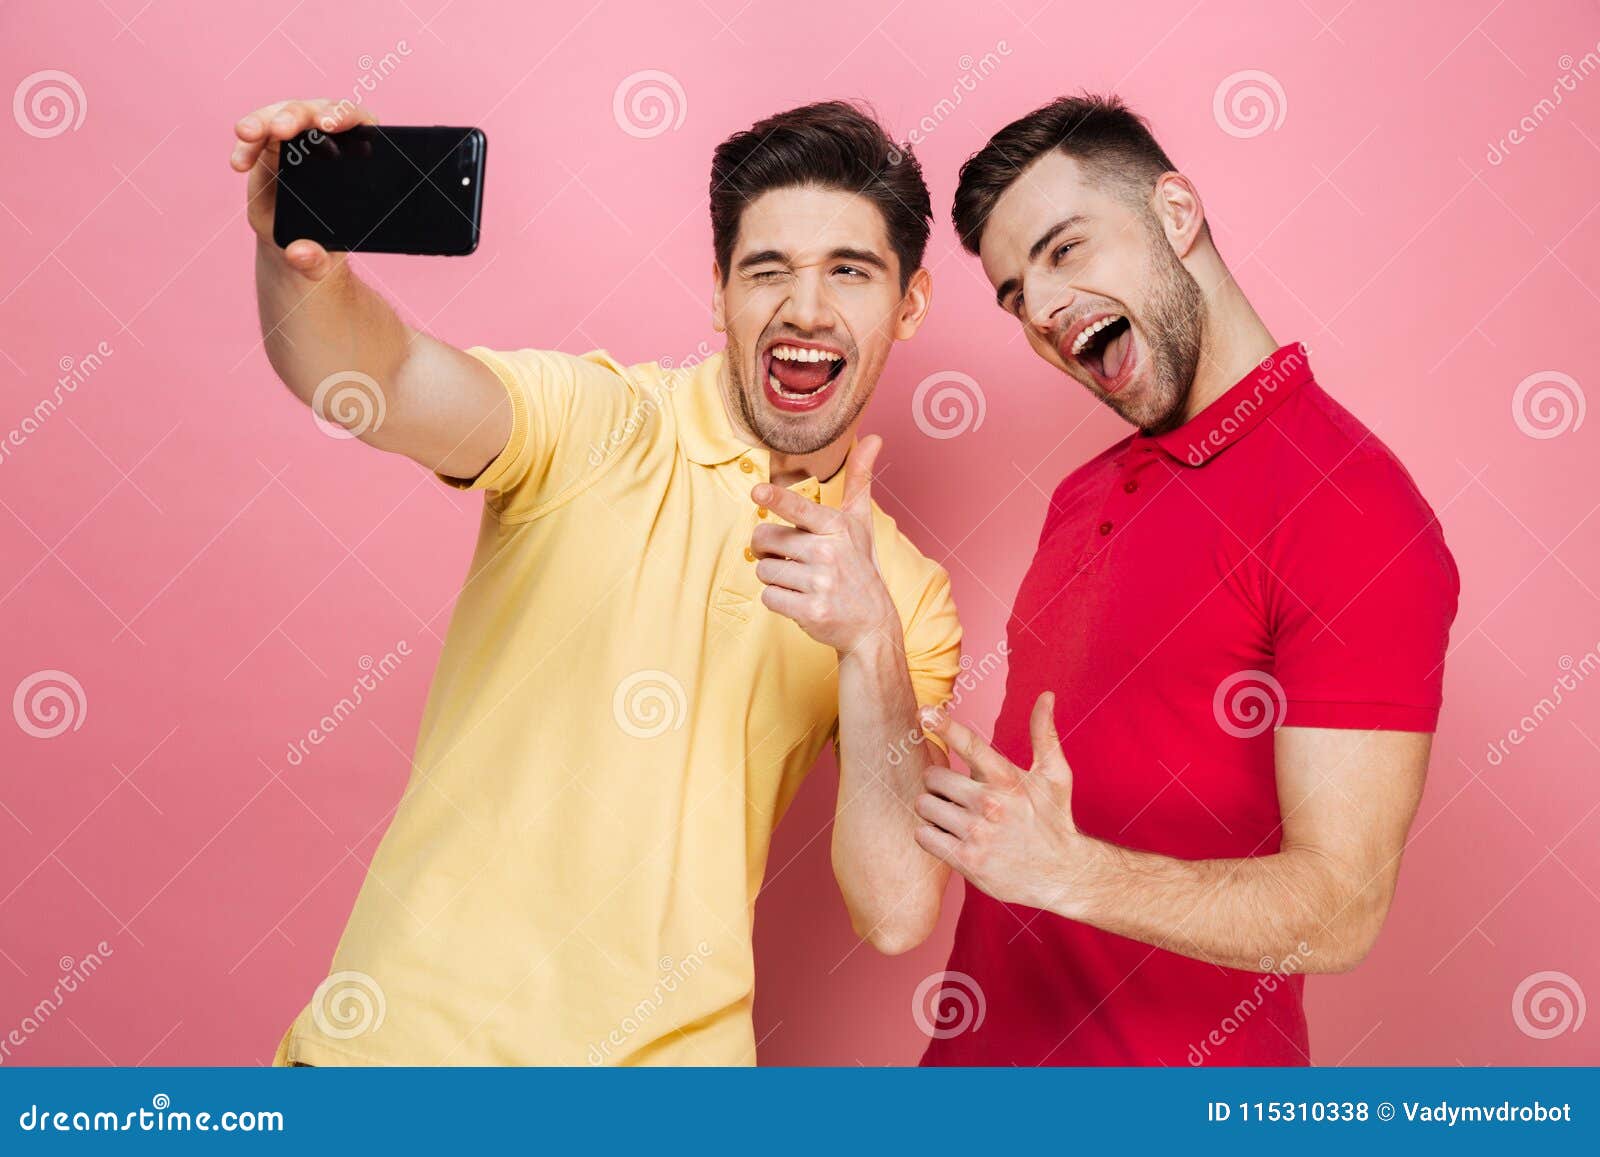 portrait-happy-gay-couple-taking-selfie-mobile-phone-showing-thumbs-up-gesture-isolated-over-pink-background-115310338.jpg